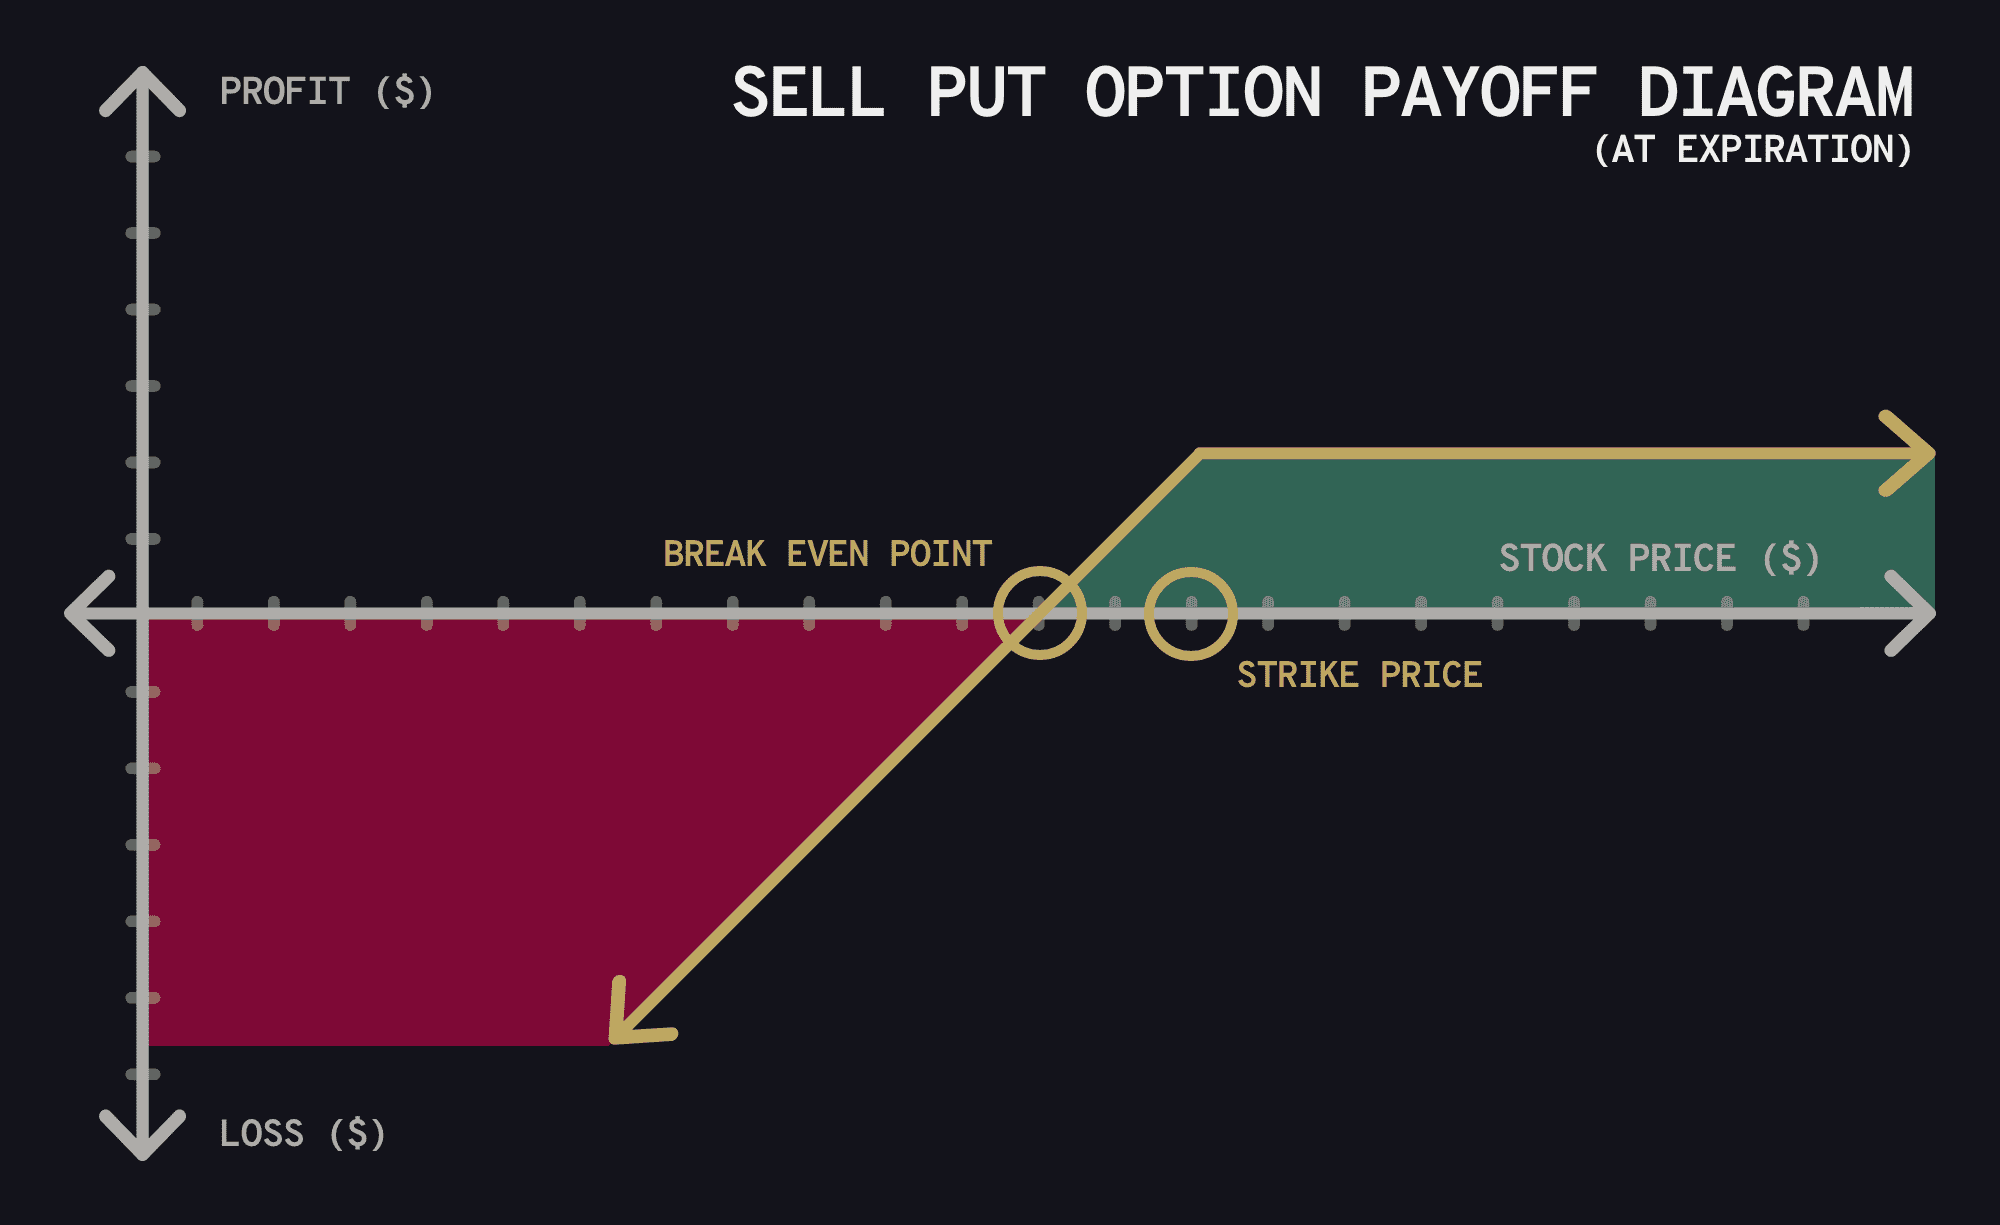 Payoff diagrams for buying and selling call and put option contracts